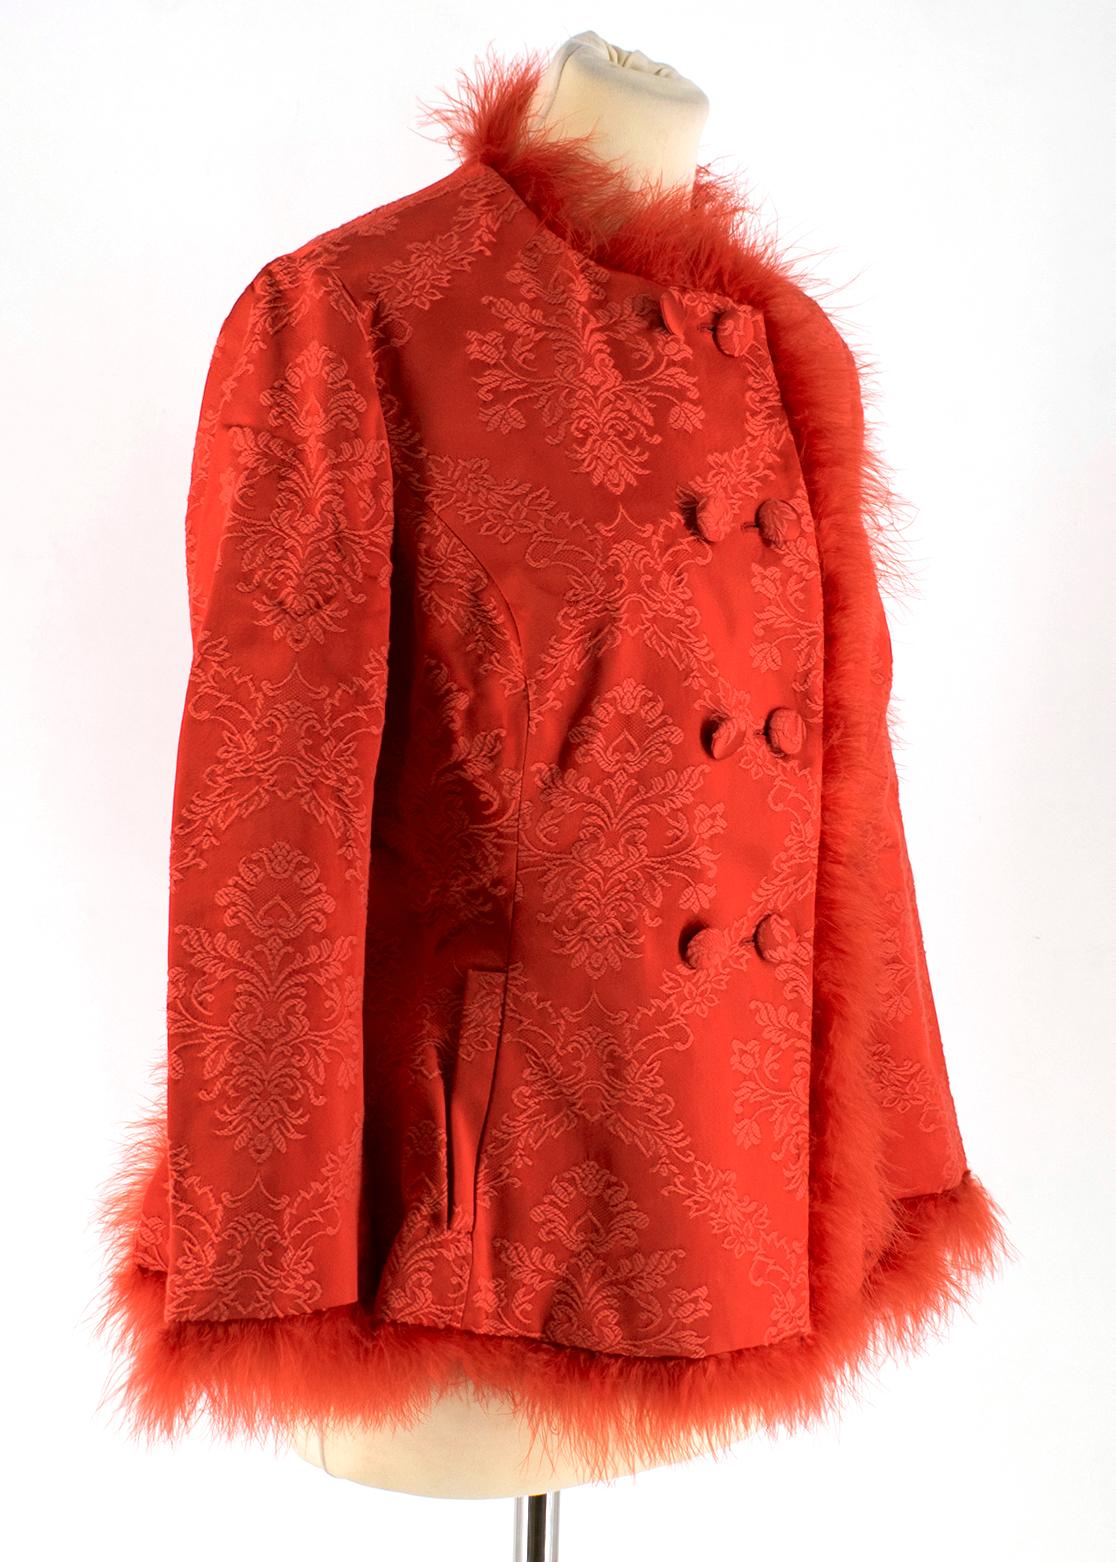 Simone Rocha Red Cotton-blend Floral-jacquard Feathered  Suit

Blazer:
- Red, cotton-blend
- Turkey feathered collar, cuffs, centre and hem
- Floral jacquard
- Double-breasted buttoned fastening 
- Buttoned cuffs
- Double front side pockets
- Long